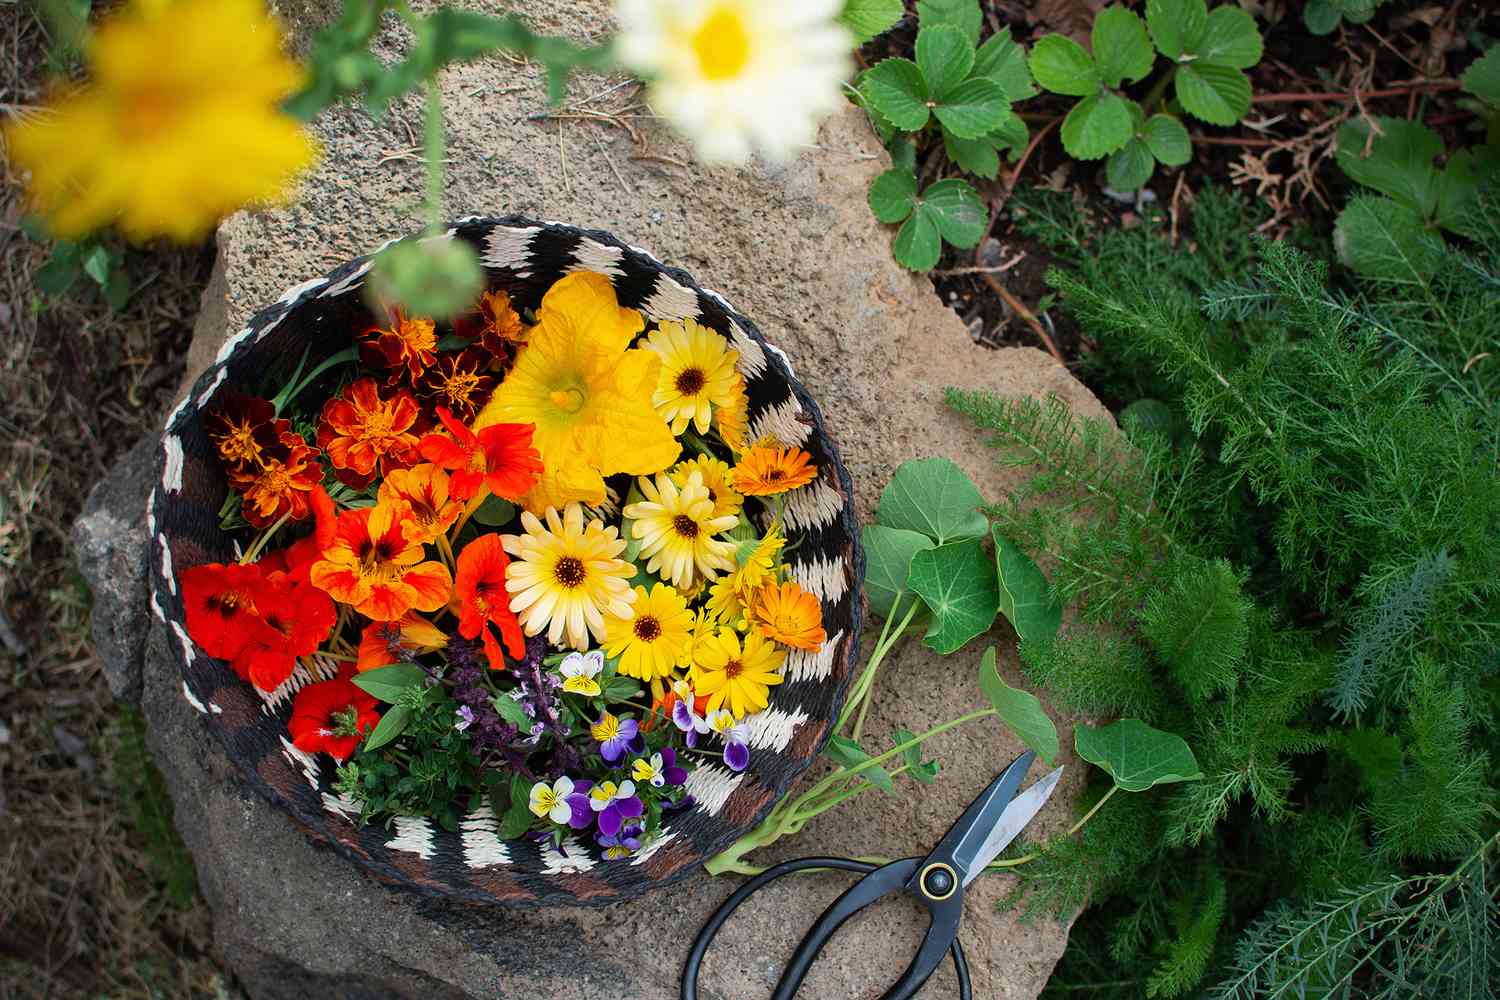 edible flowers collected in a garden